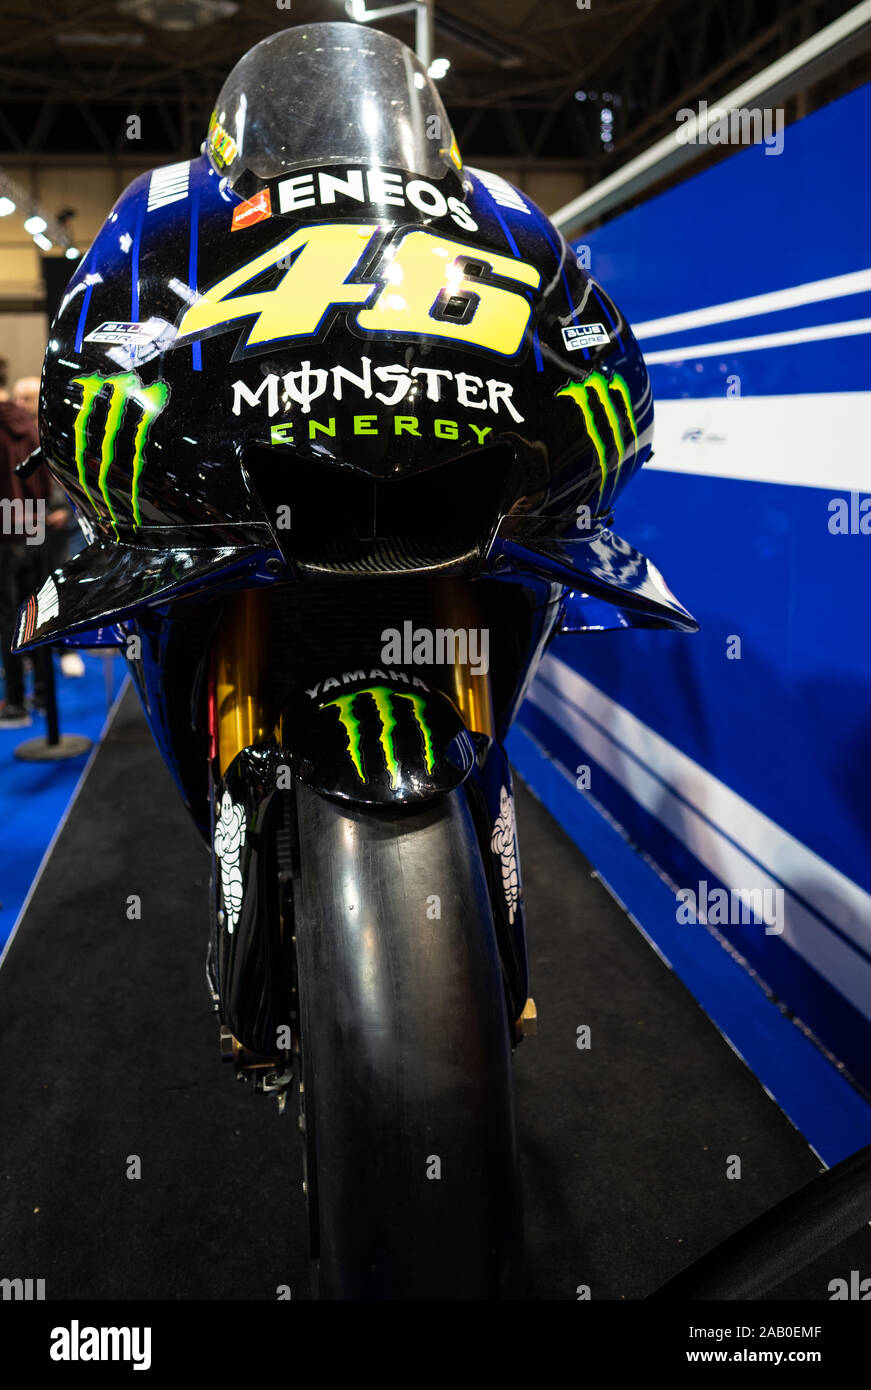 Front view of the Yamaha YZR-M1 ridden by Valentino Rossi for the Monster Energy Yamaha MotoGP team in the 2019 MotoGP championship Stock Photo